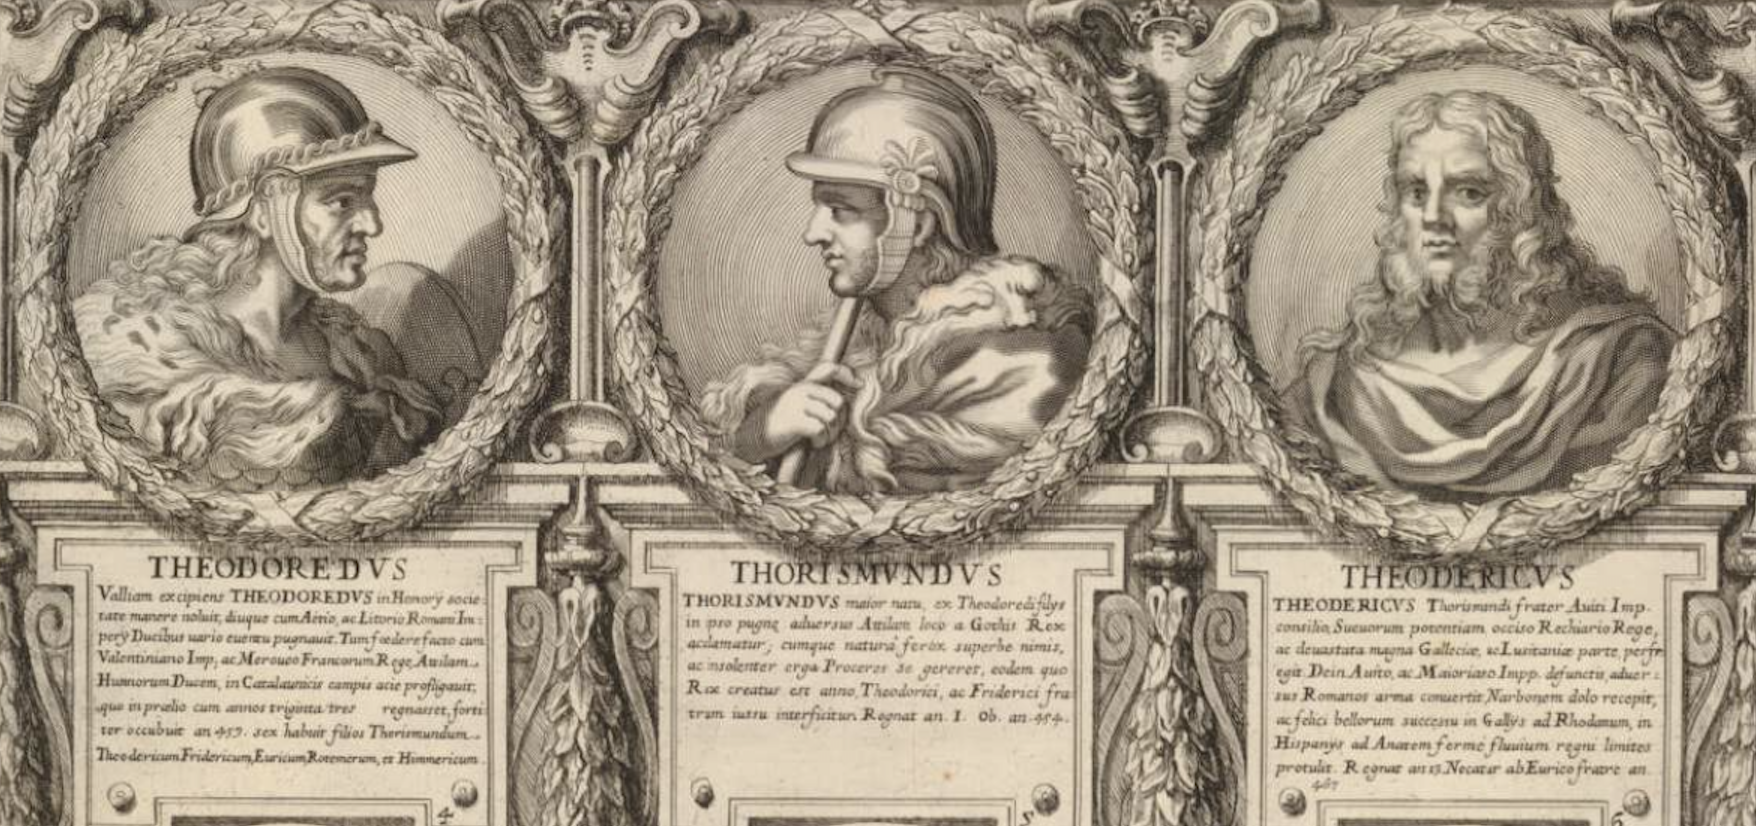 A 17th-century Italian illustration containing the (imagined) likenesses of Theodoric I (left), his son Thorismund (centre), and Theodoric II.